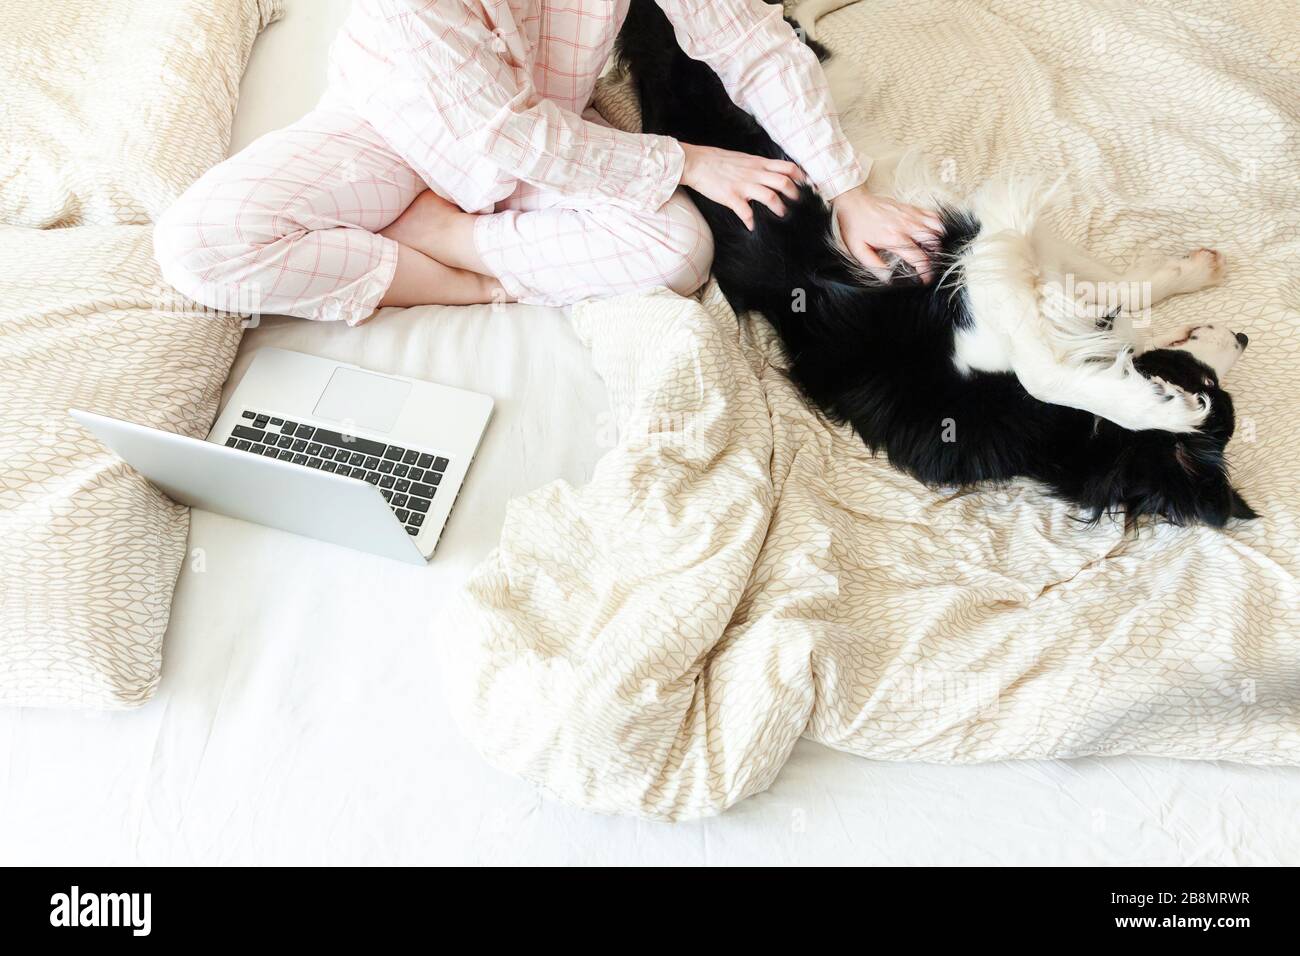 Girl Studying Pet High Resolution Stock Photography and Images - Alamy